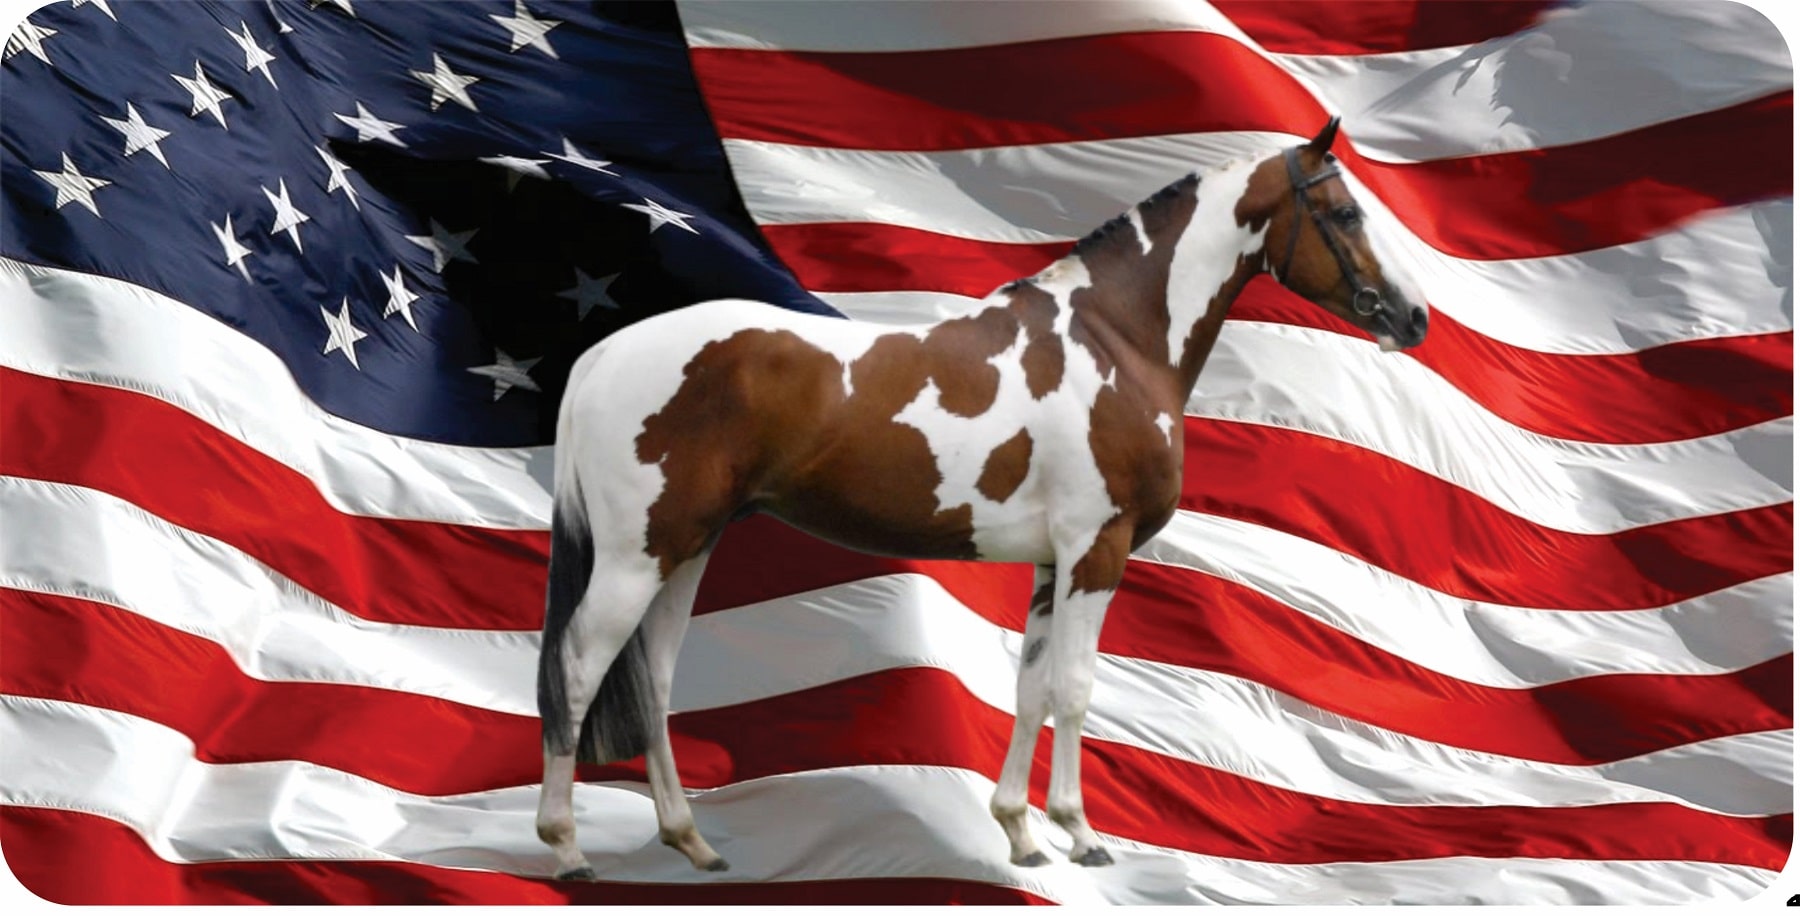 PAINT Horse On U.S. Flag Photo License Plate